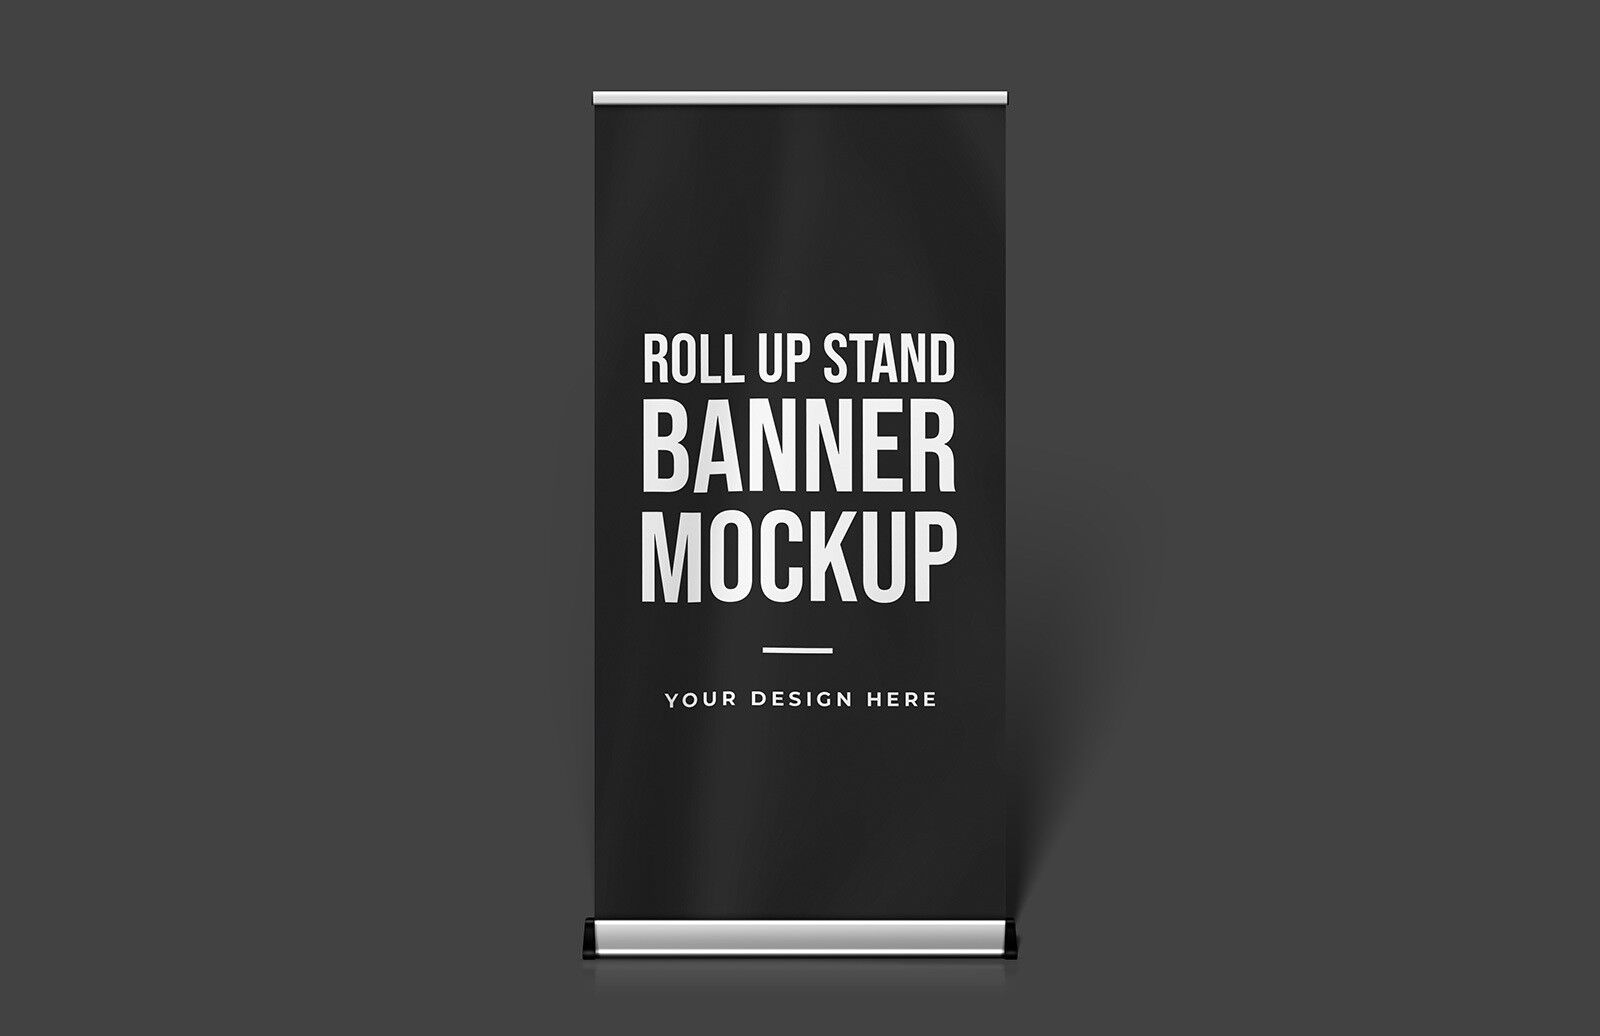 Single Roll up Stand Banner Mockup FREE PSD